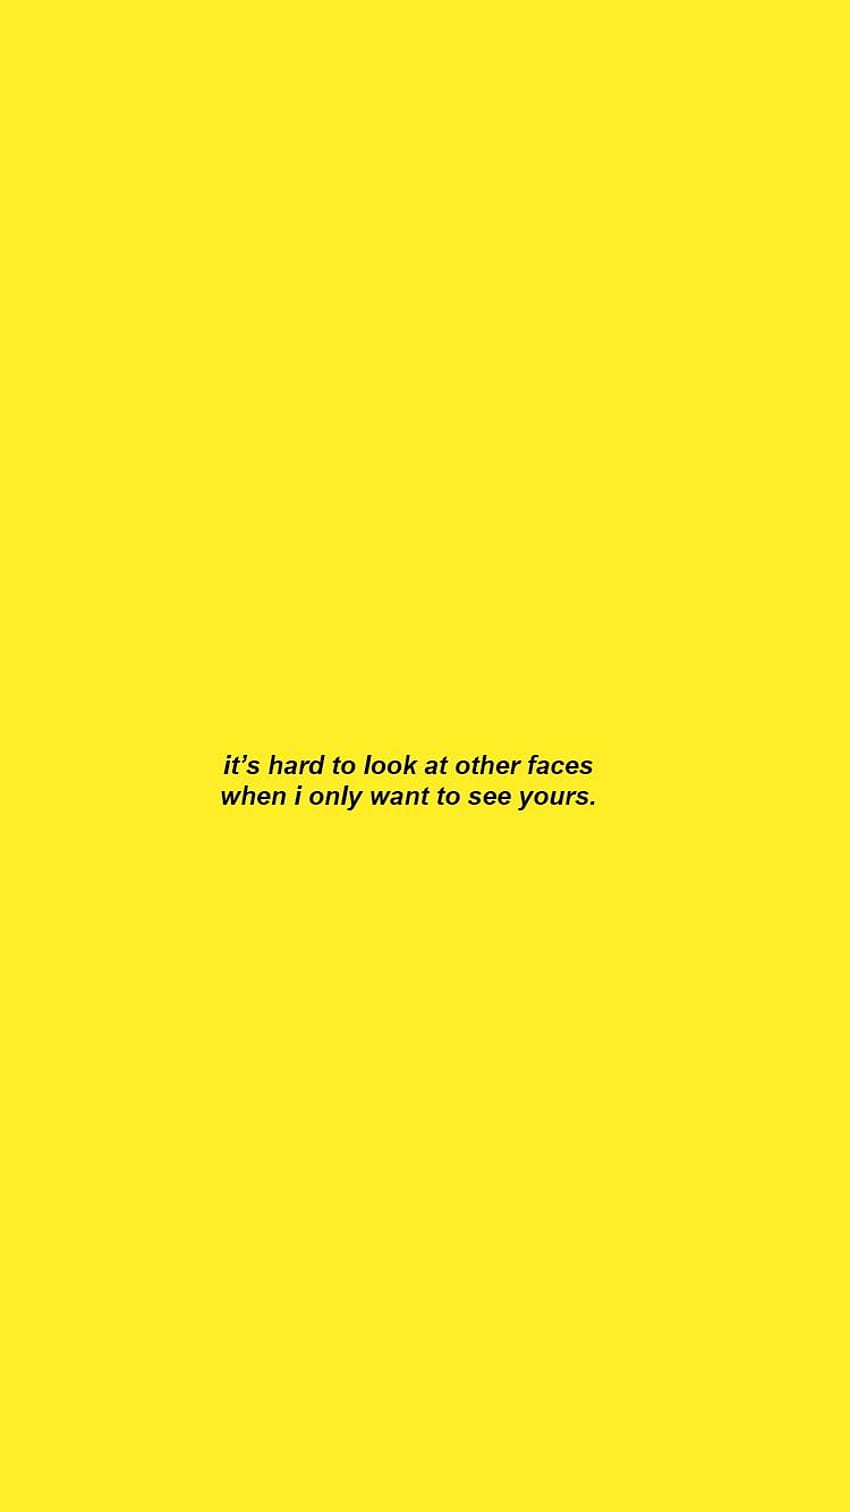 Quotes From The Yellow Wallpaper